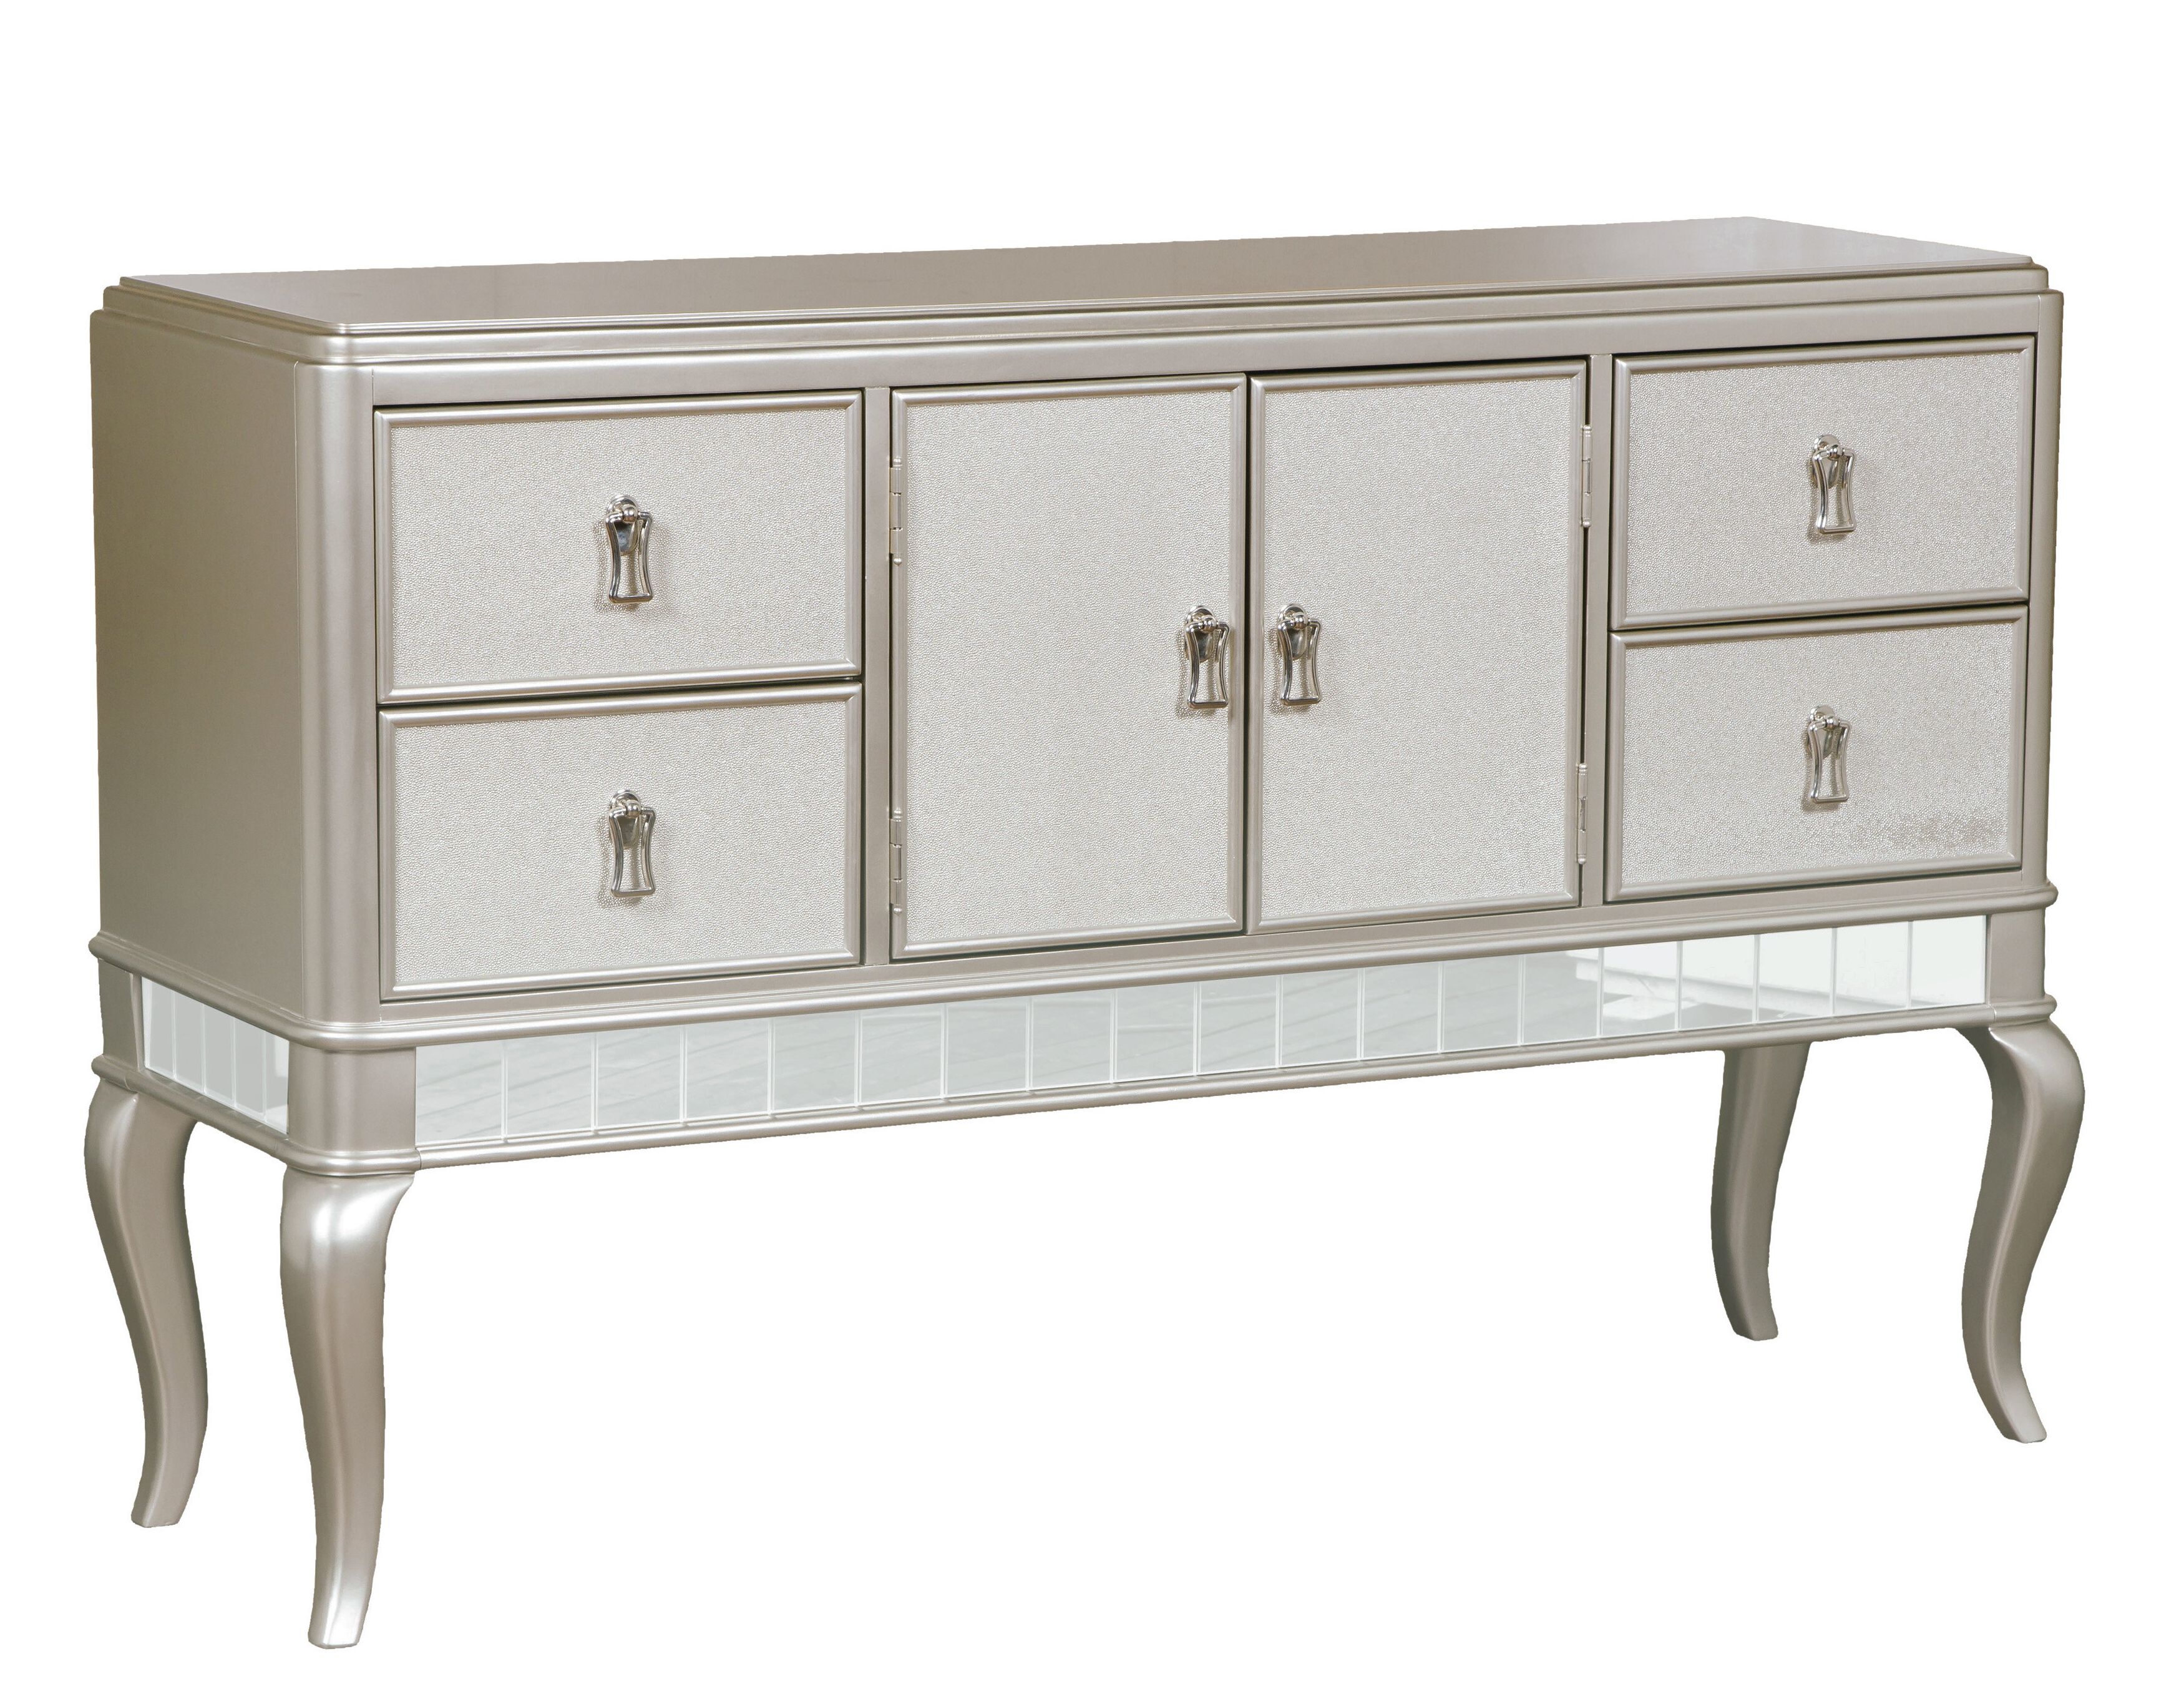 Gragg Sideboard Throughout Most Recently Released Cambrai Sideboards (View 19 of 20)